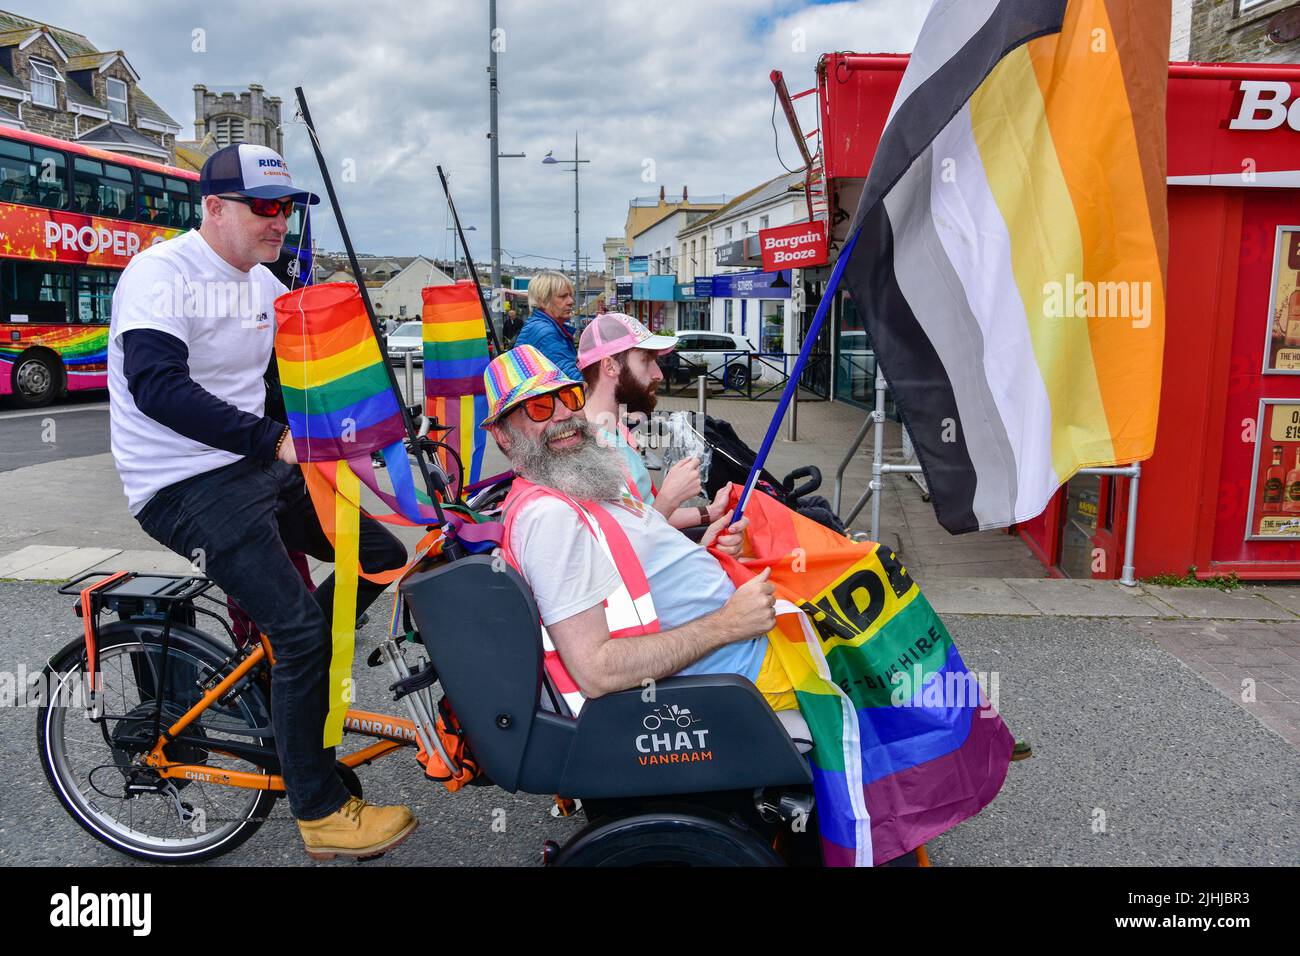 Participants riding in a Chat Van Raam Electric rickshaw in the vibrant colourful Cornwall Prides Pride parade in Newquay Town centre in the UK. Stock Photo